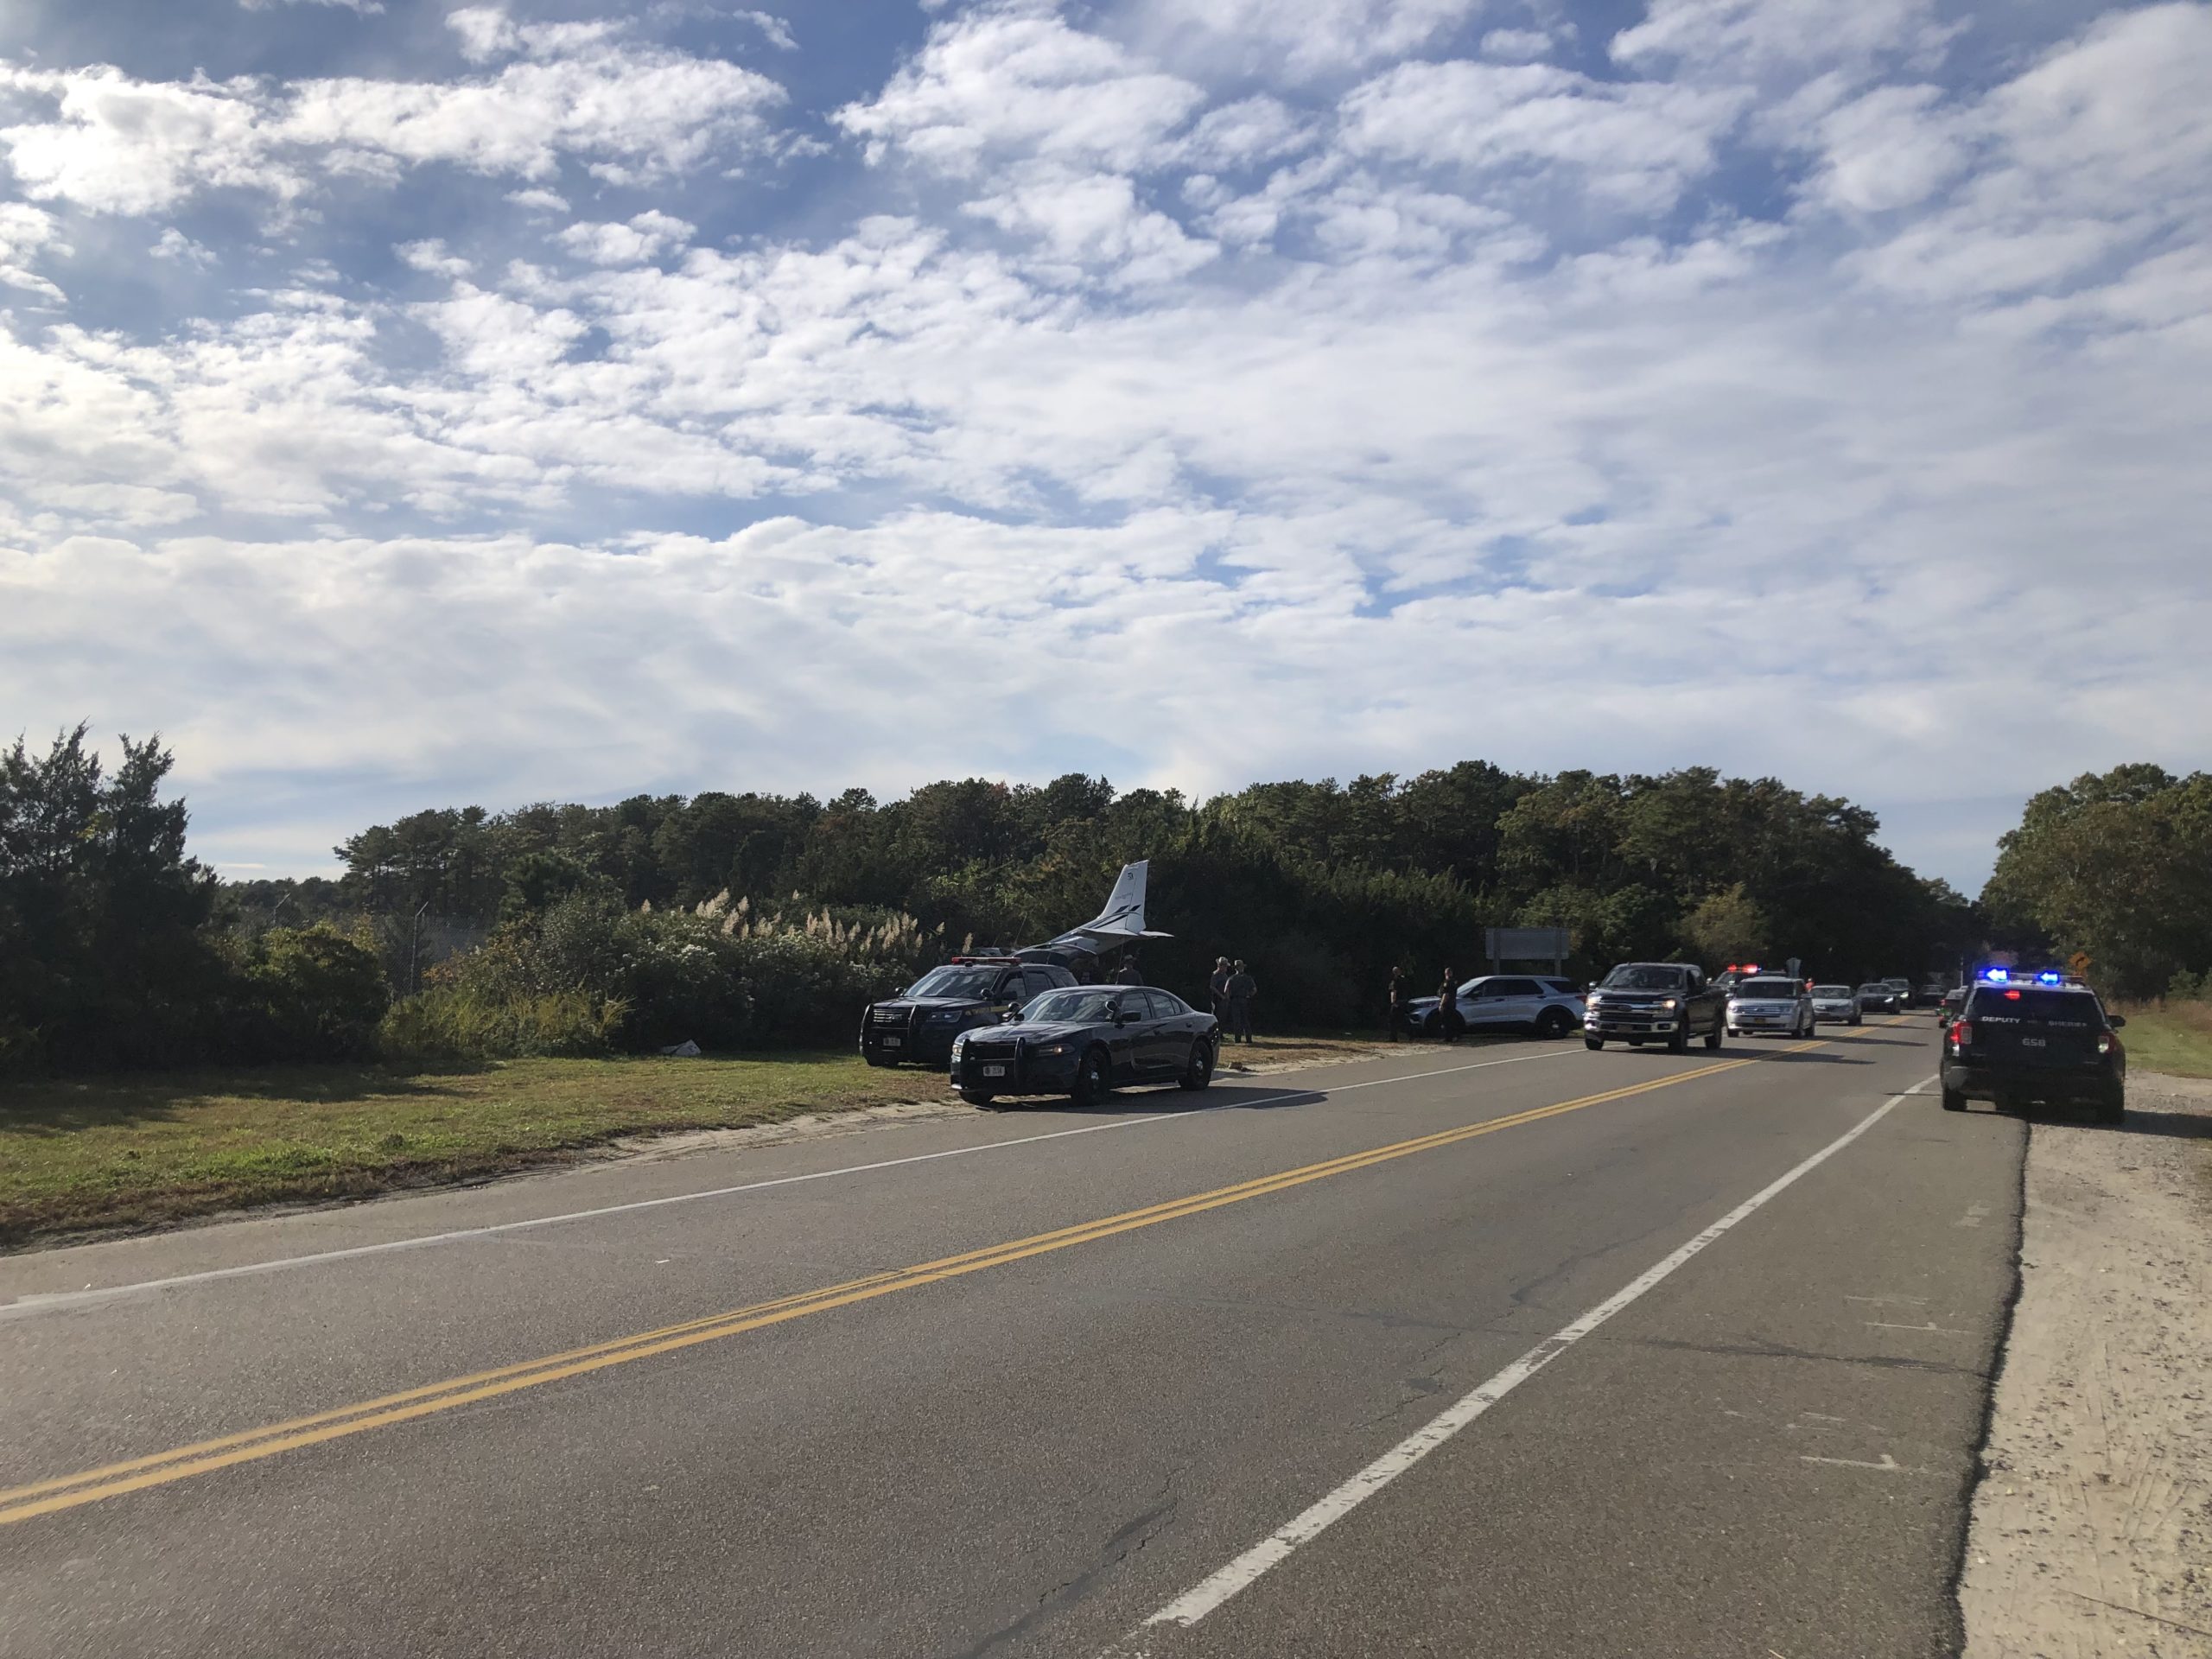 A small plane crashed on Saturday afternoon in East Quogue.